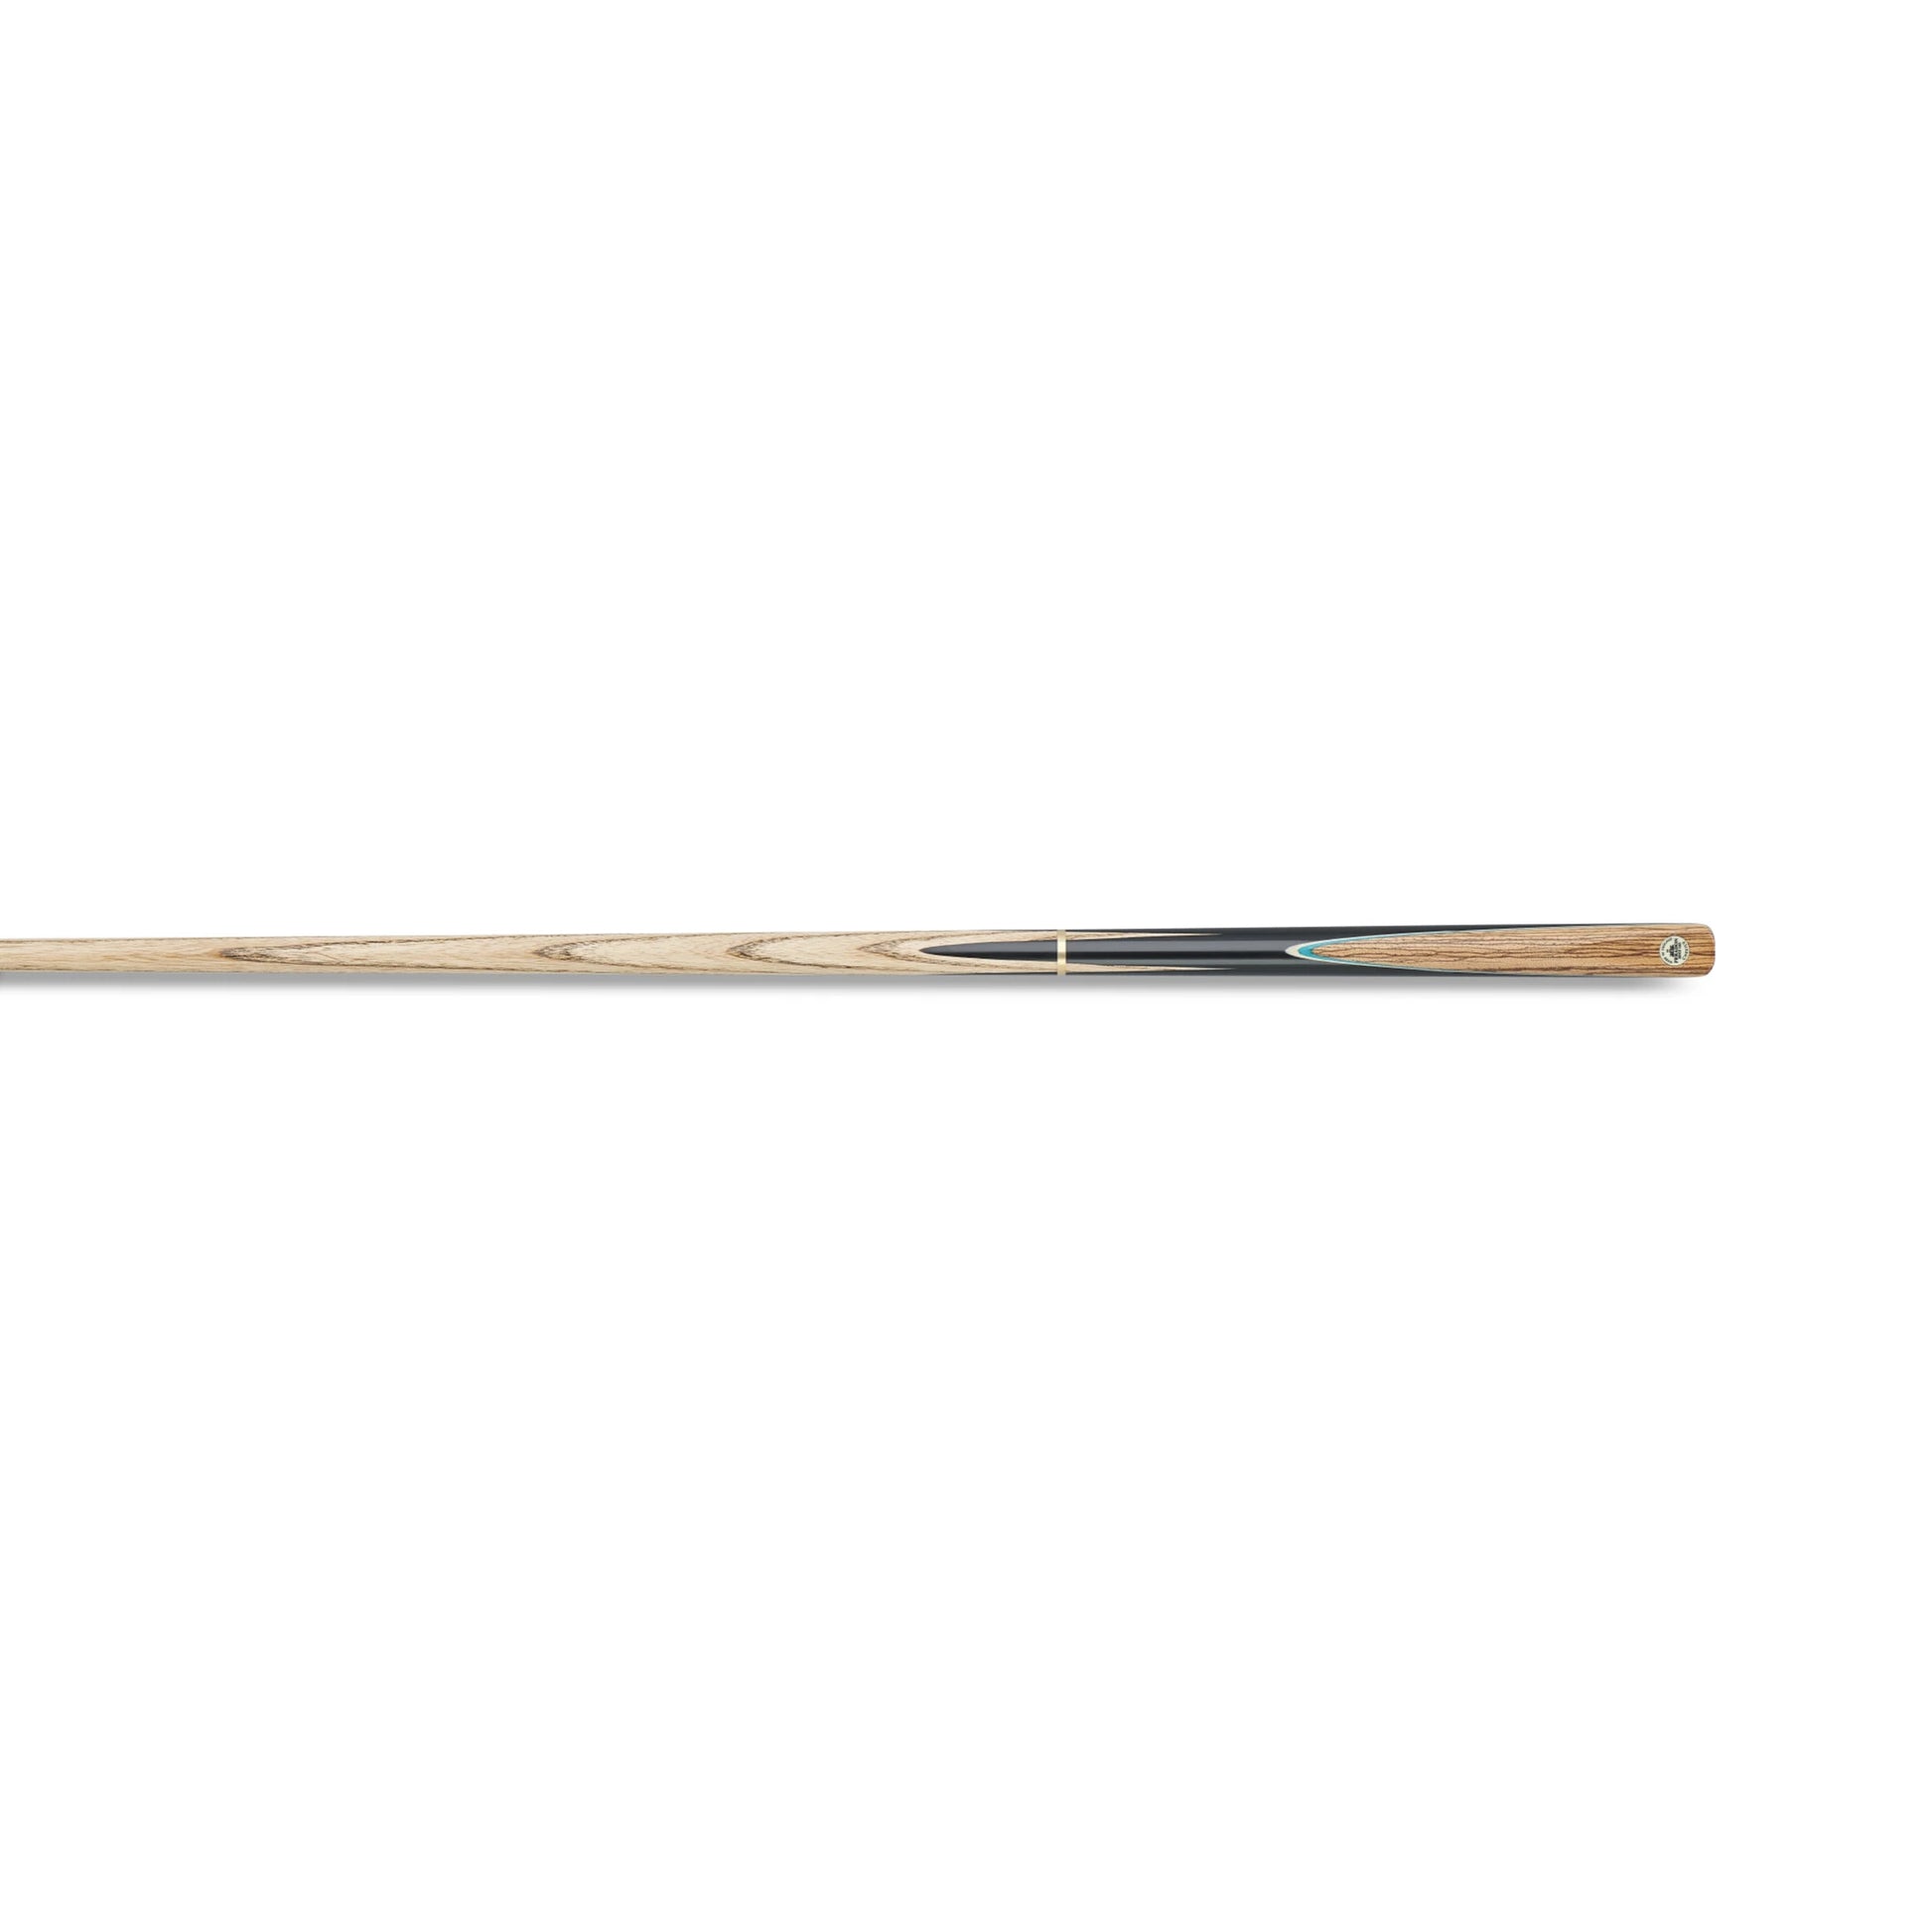 Peradon Chester ¾ Jointed Snooker Cue